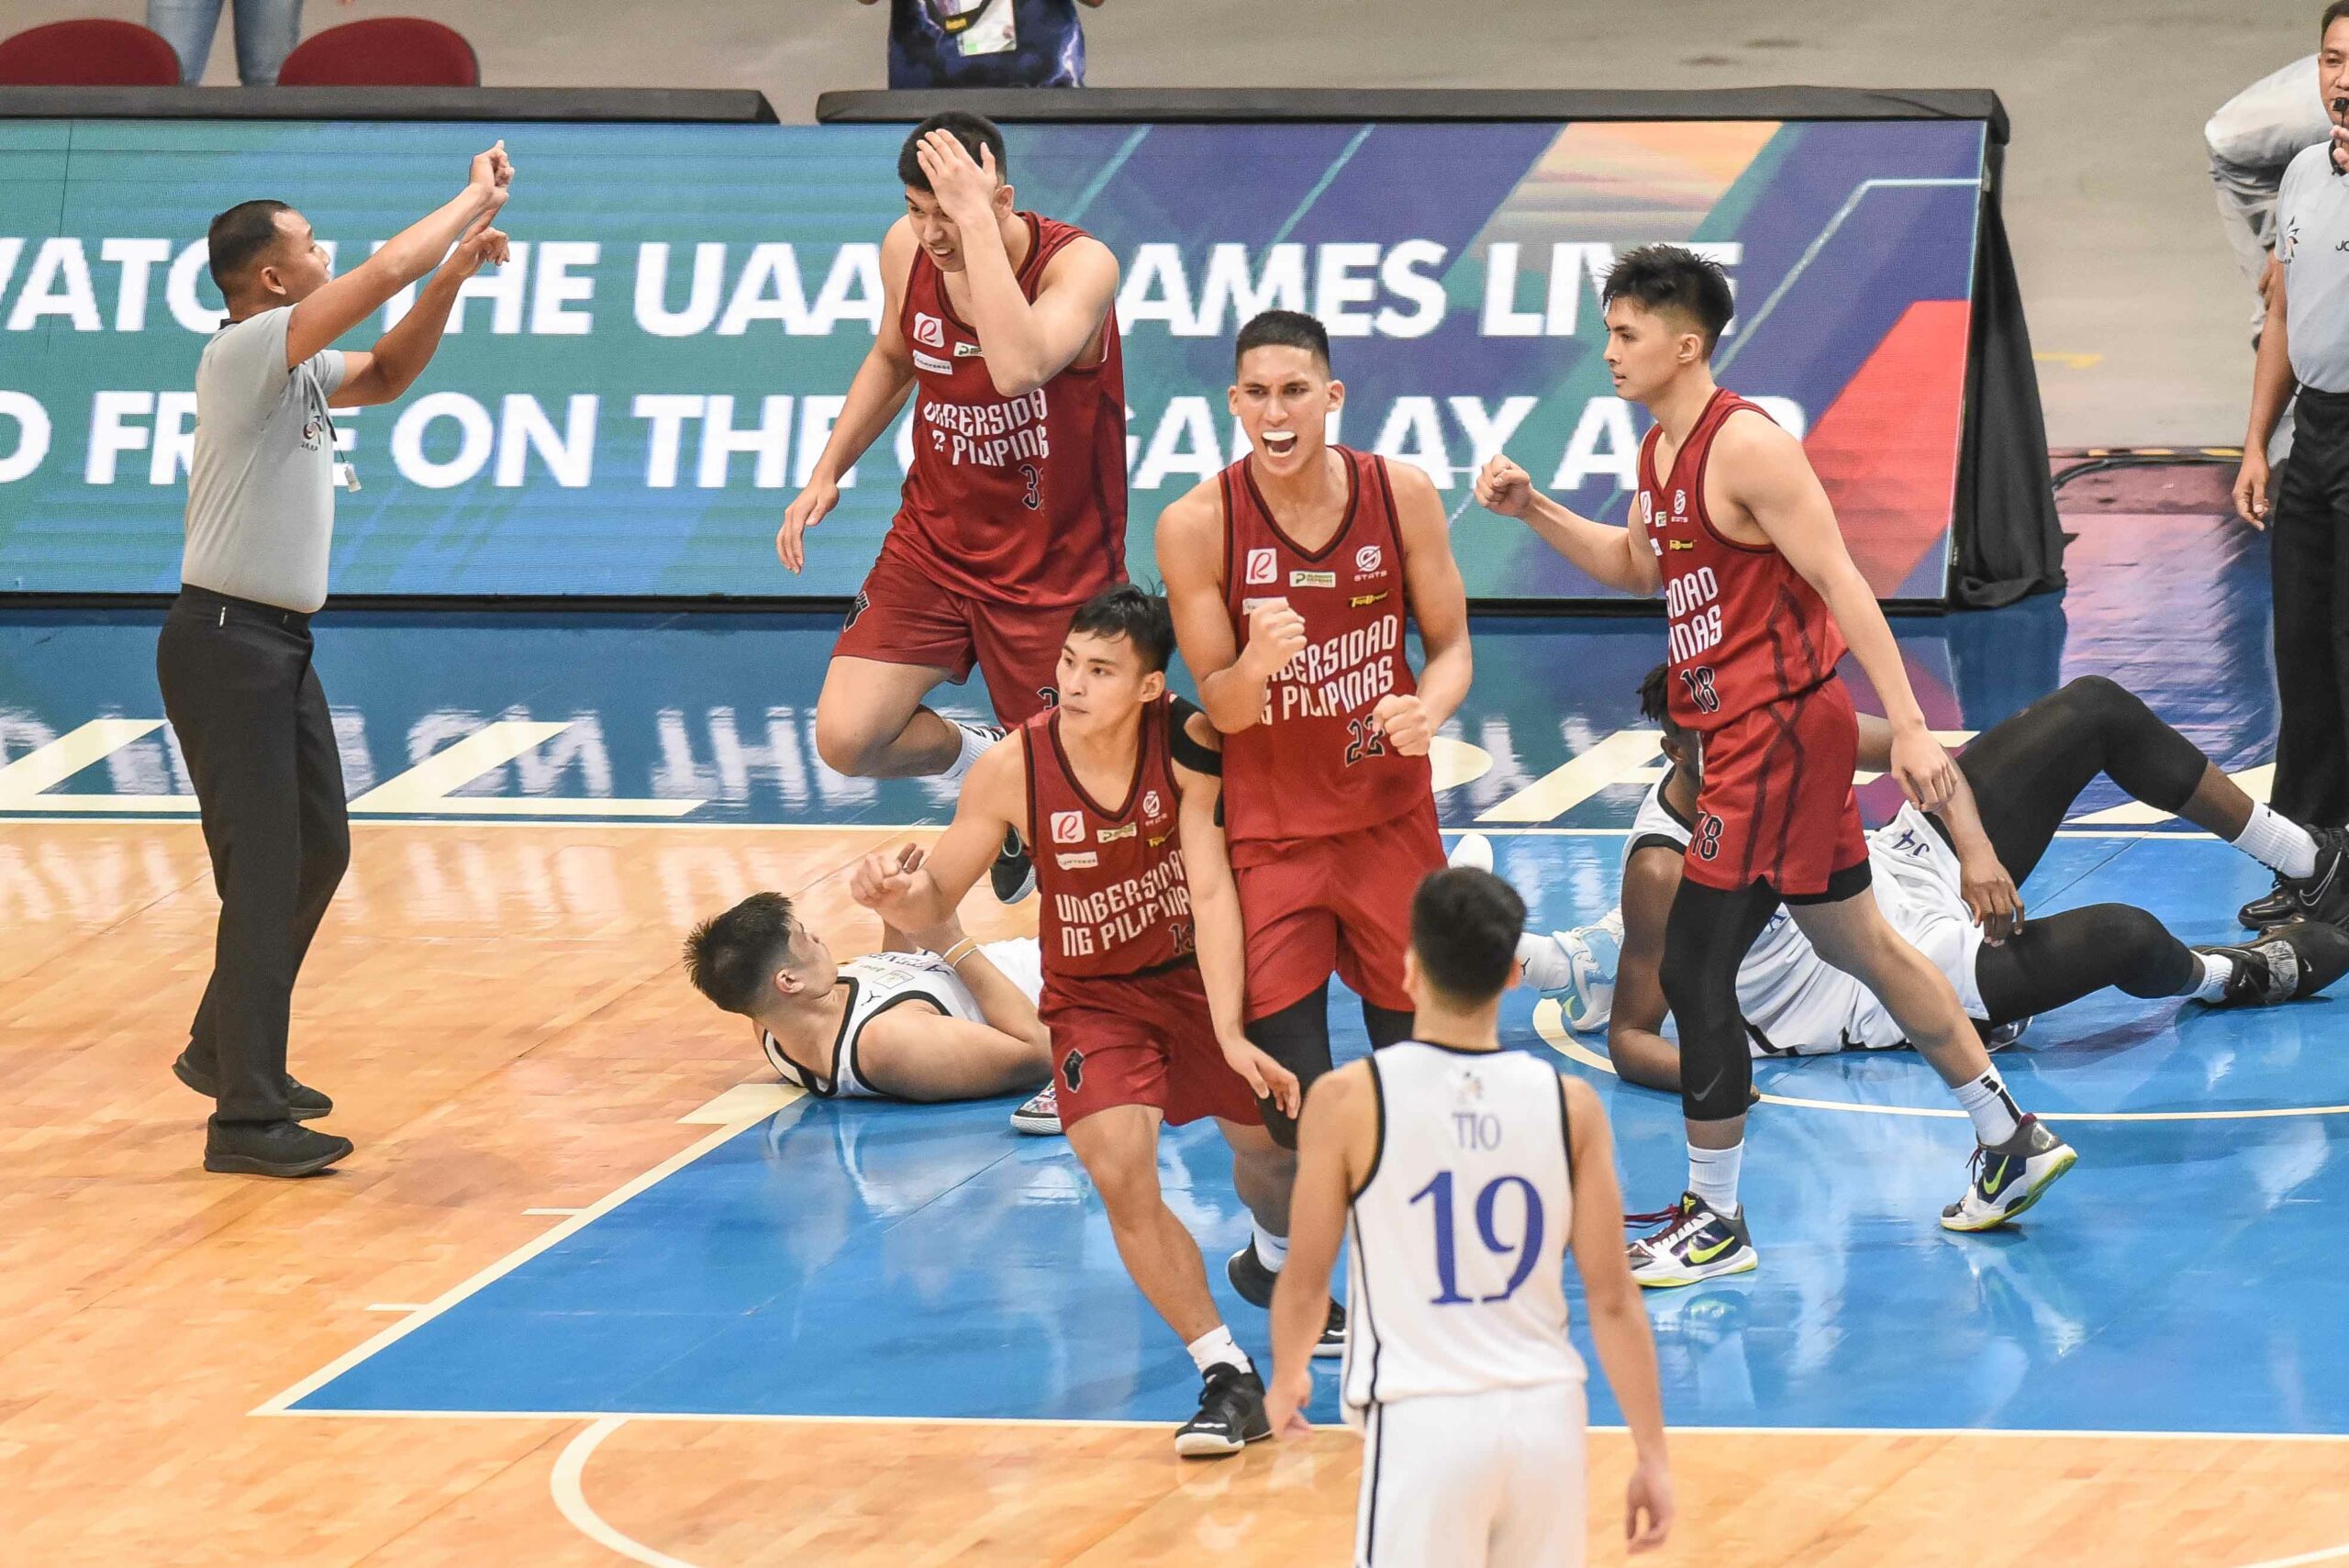 UAAP-84-Mens-Basketball-Ateneo-vs-UP-UP-3-scaled Baldwin looks to counter UP's size, but DI needs to 'settle down' for Game 2 ADMU Basketball News UAAP  - philippine sports news